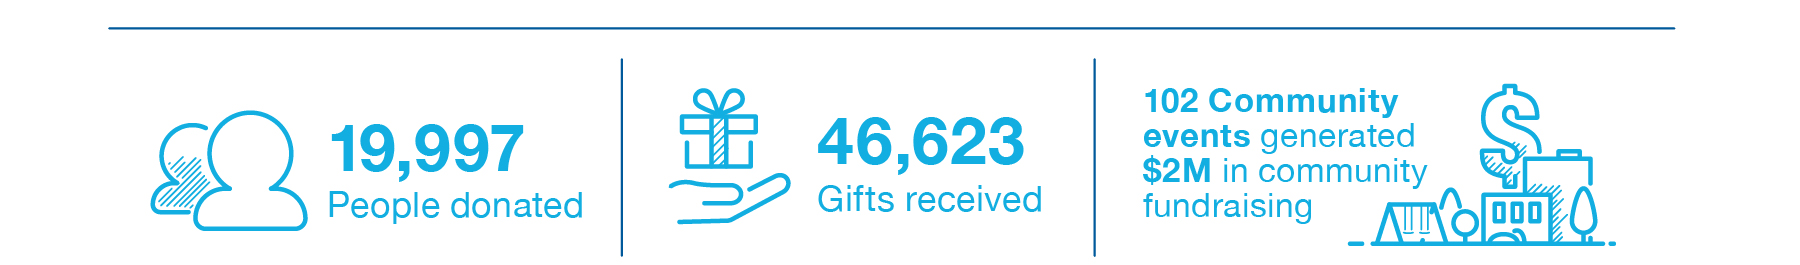 19,997 People donated. 46,623 gifts received, 102 Community events generated $2M in community fundraising.